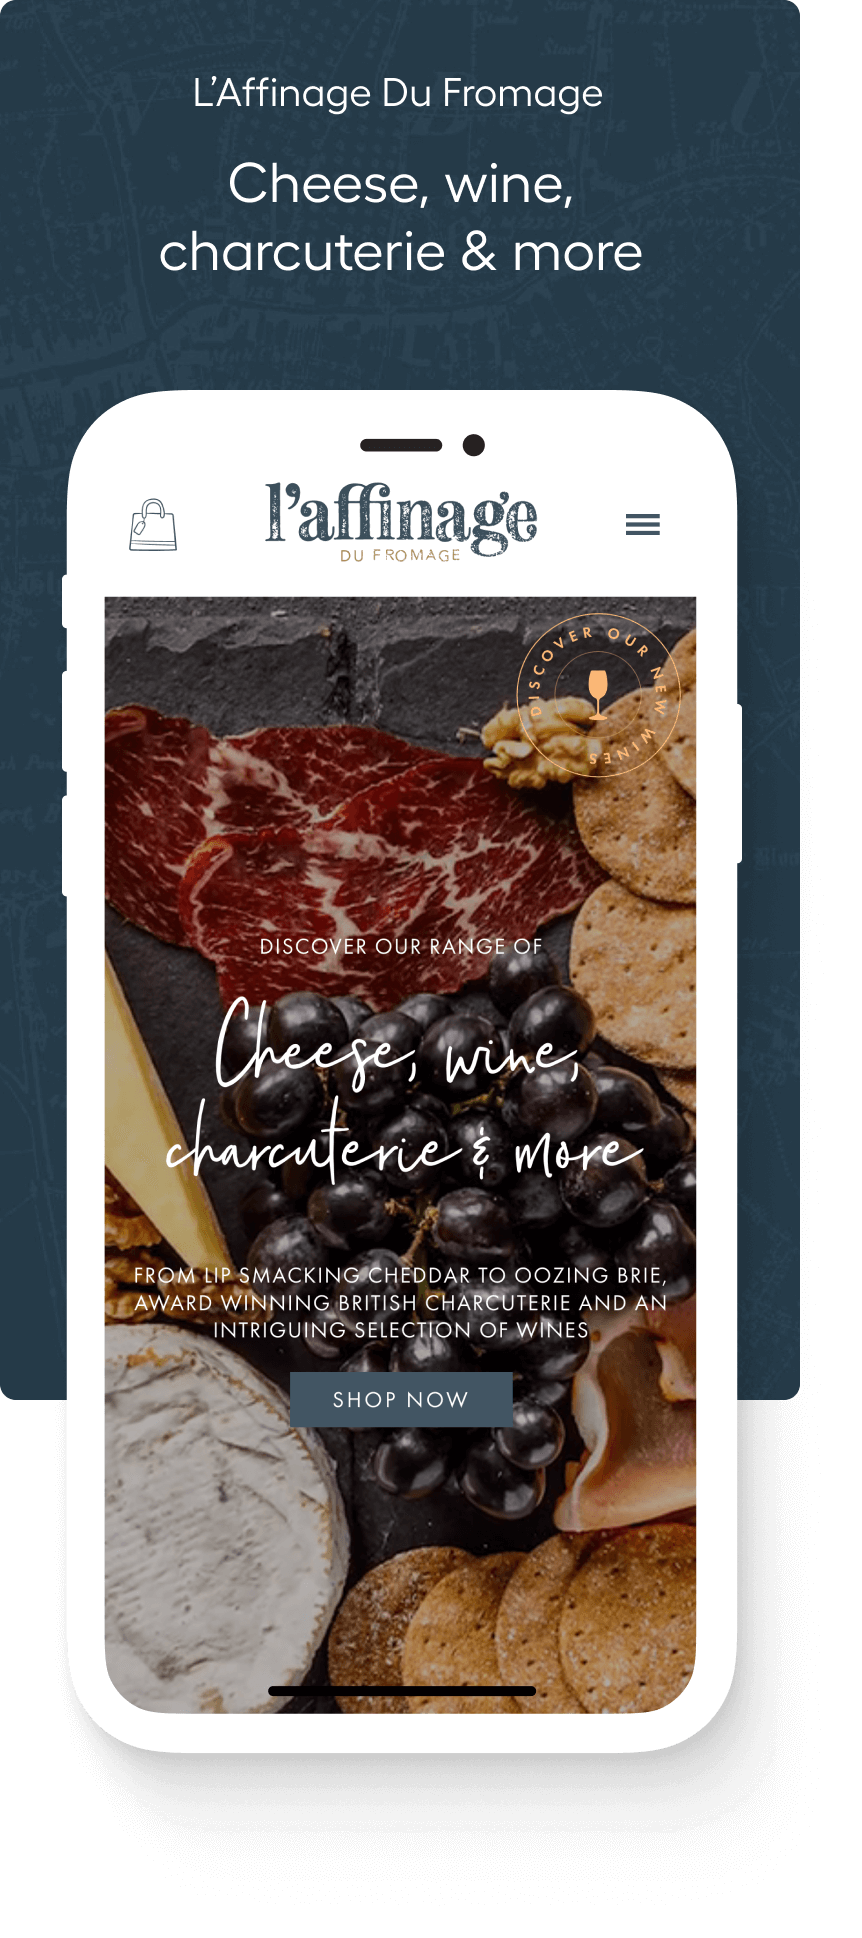 L'Affinage - Cheese, wine charcuterie & more